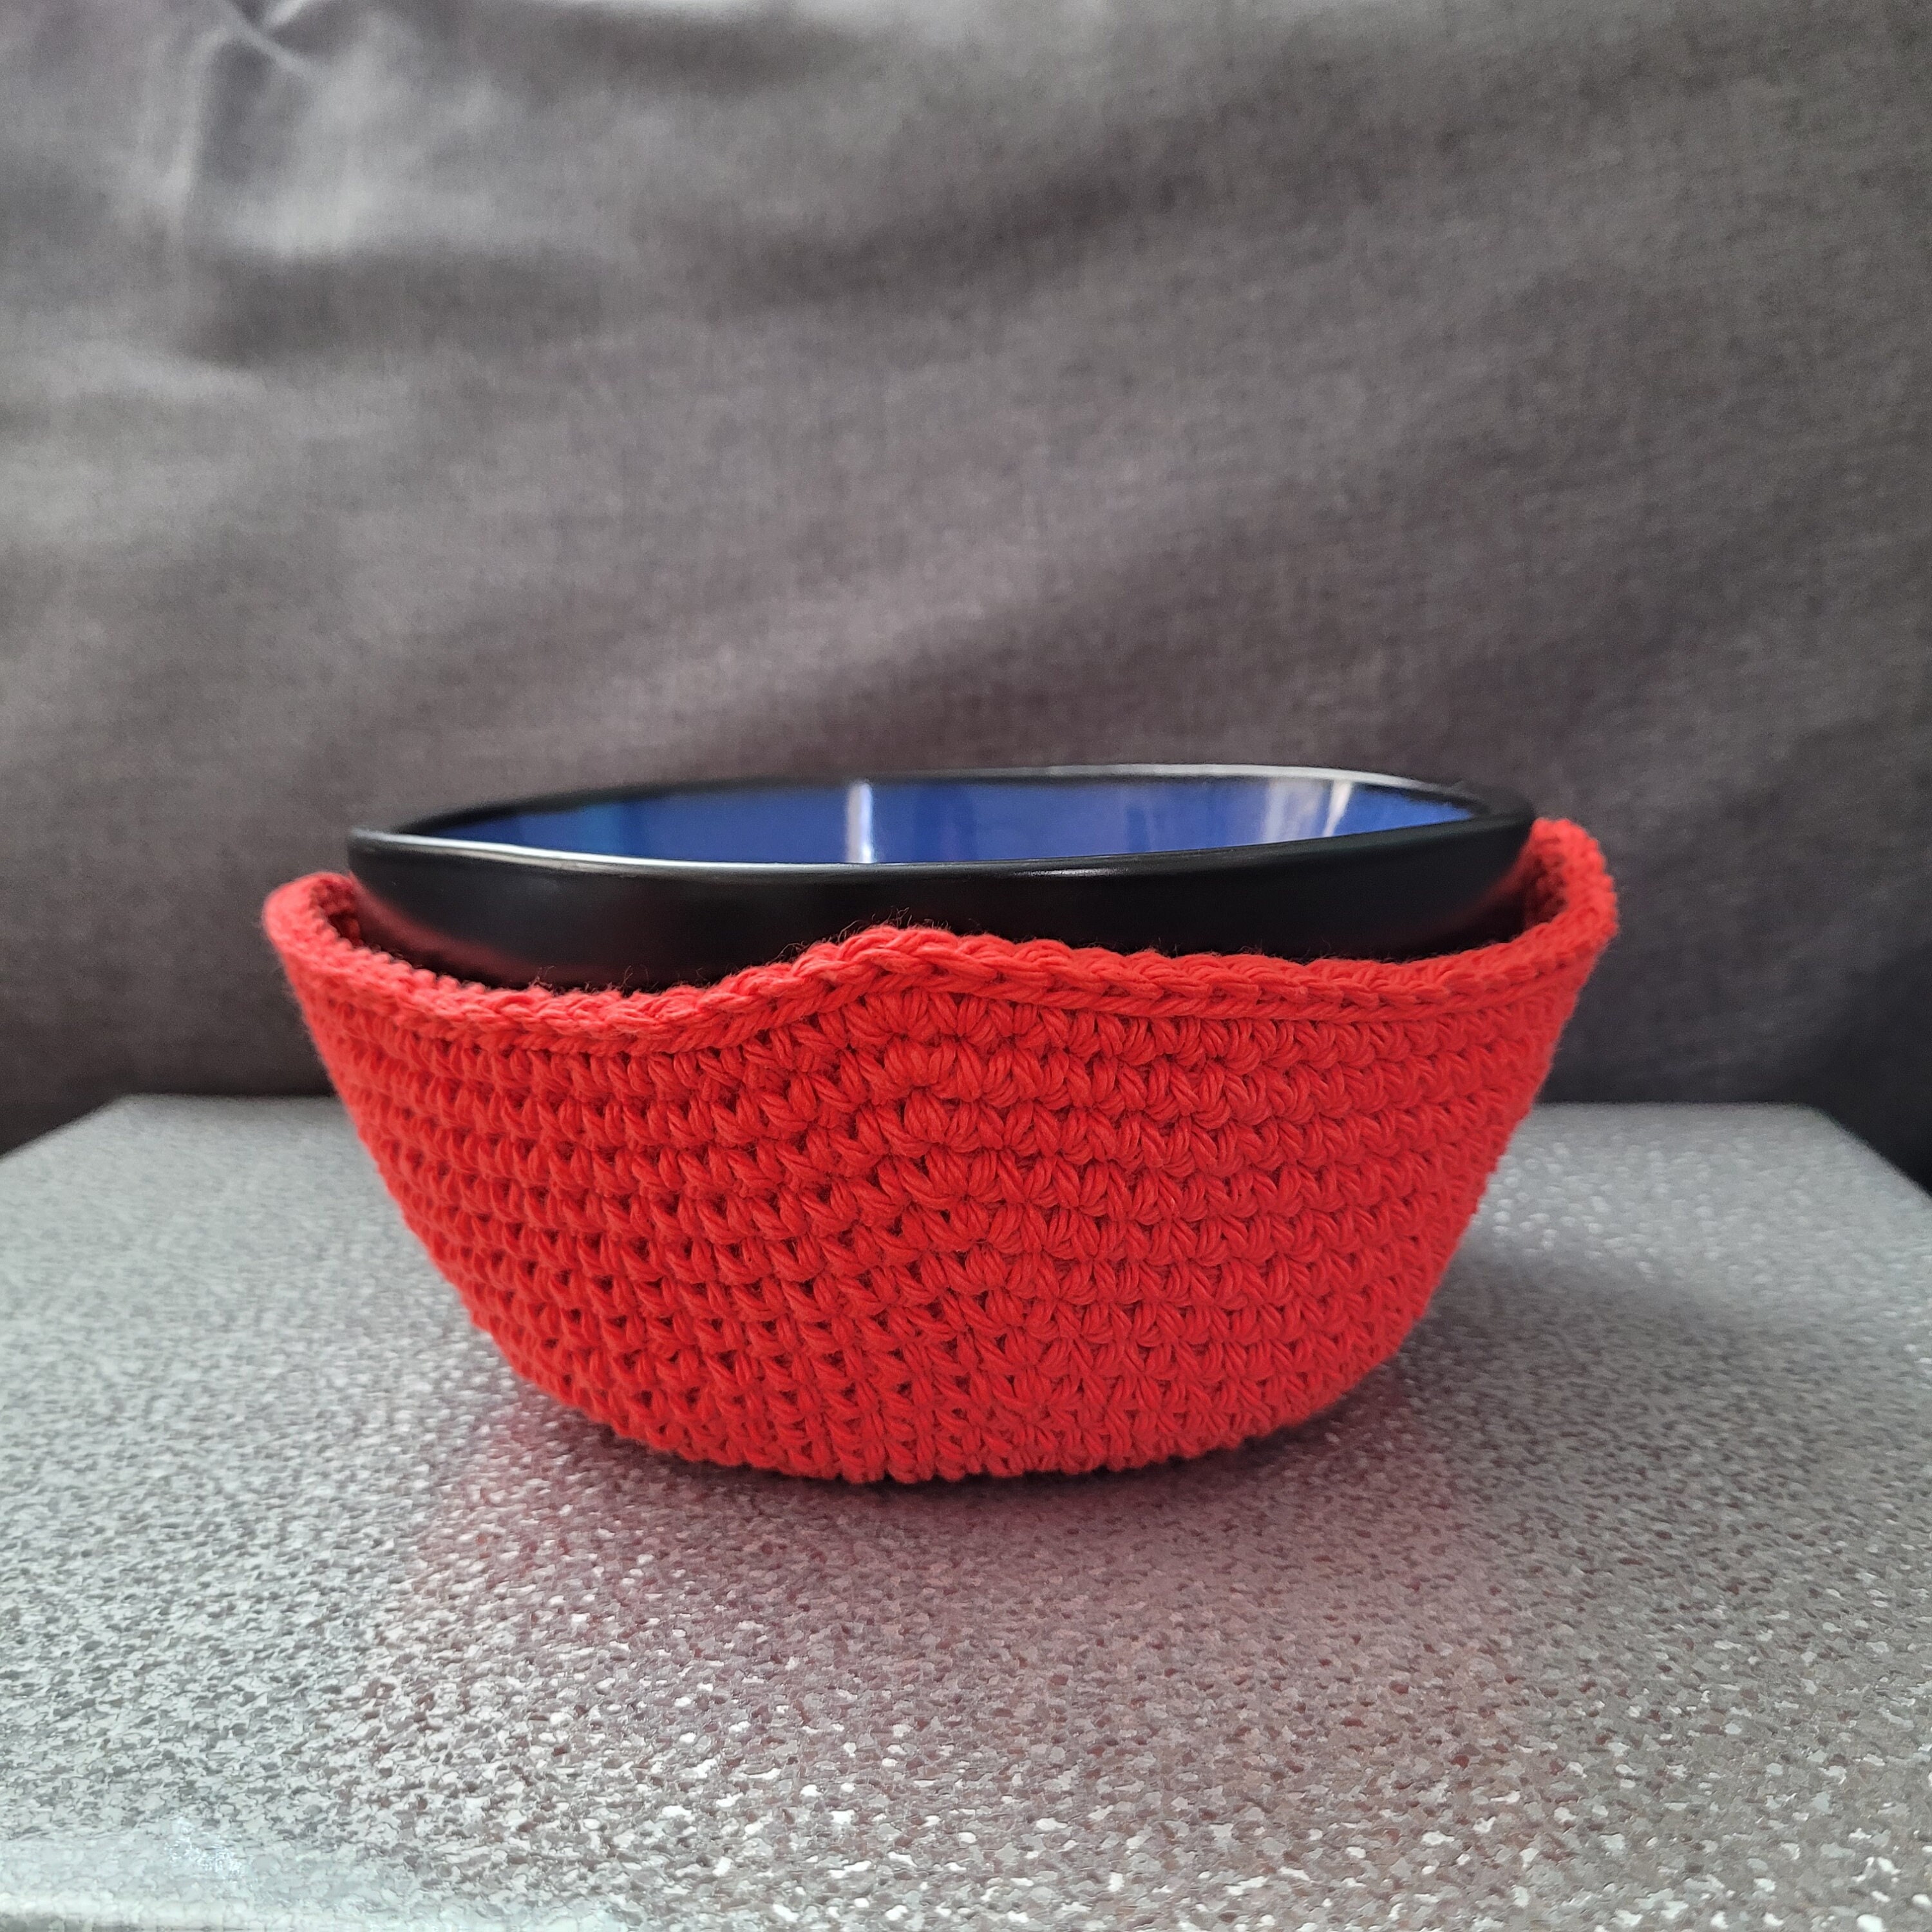 How to Make Bowl Cozies in 3 Sizes (Free Template) - MindyMakes